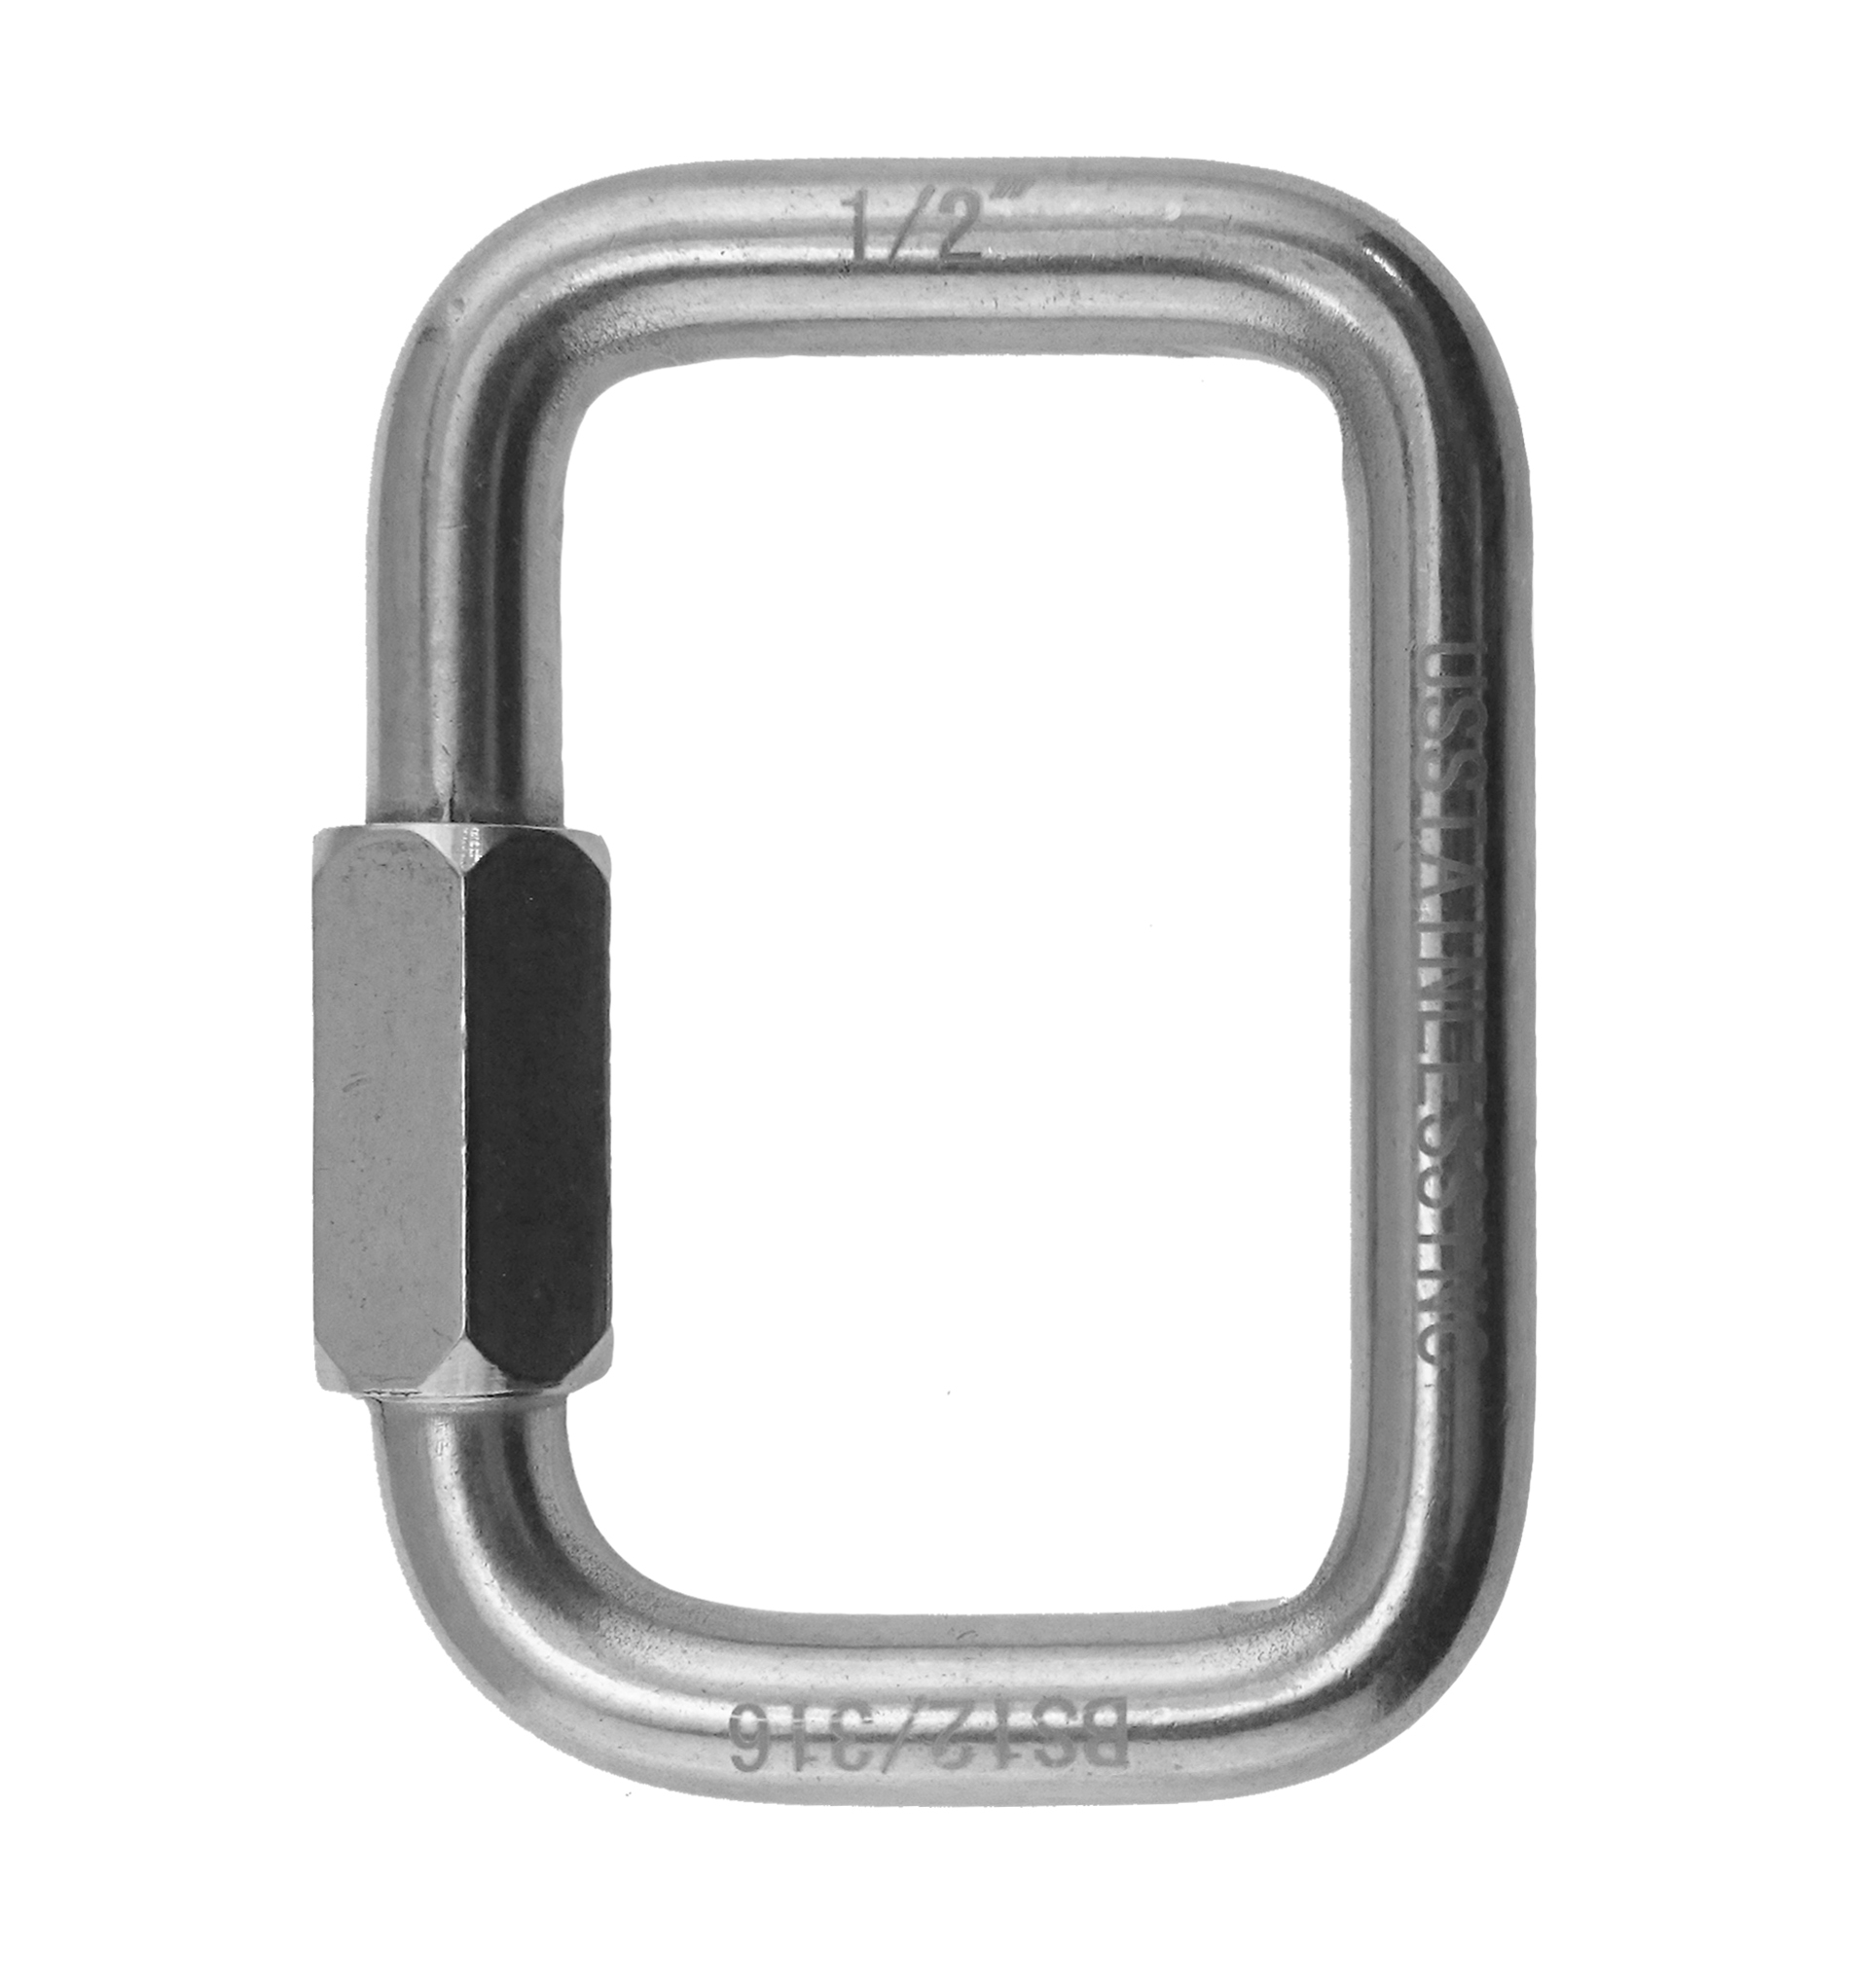 Stainless Steel 316 1 x 3 1/8 Bolt Snap Square Swivel End Marine